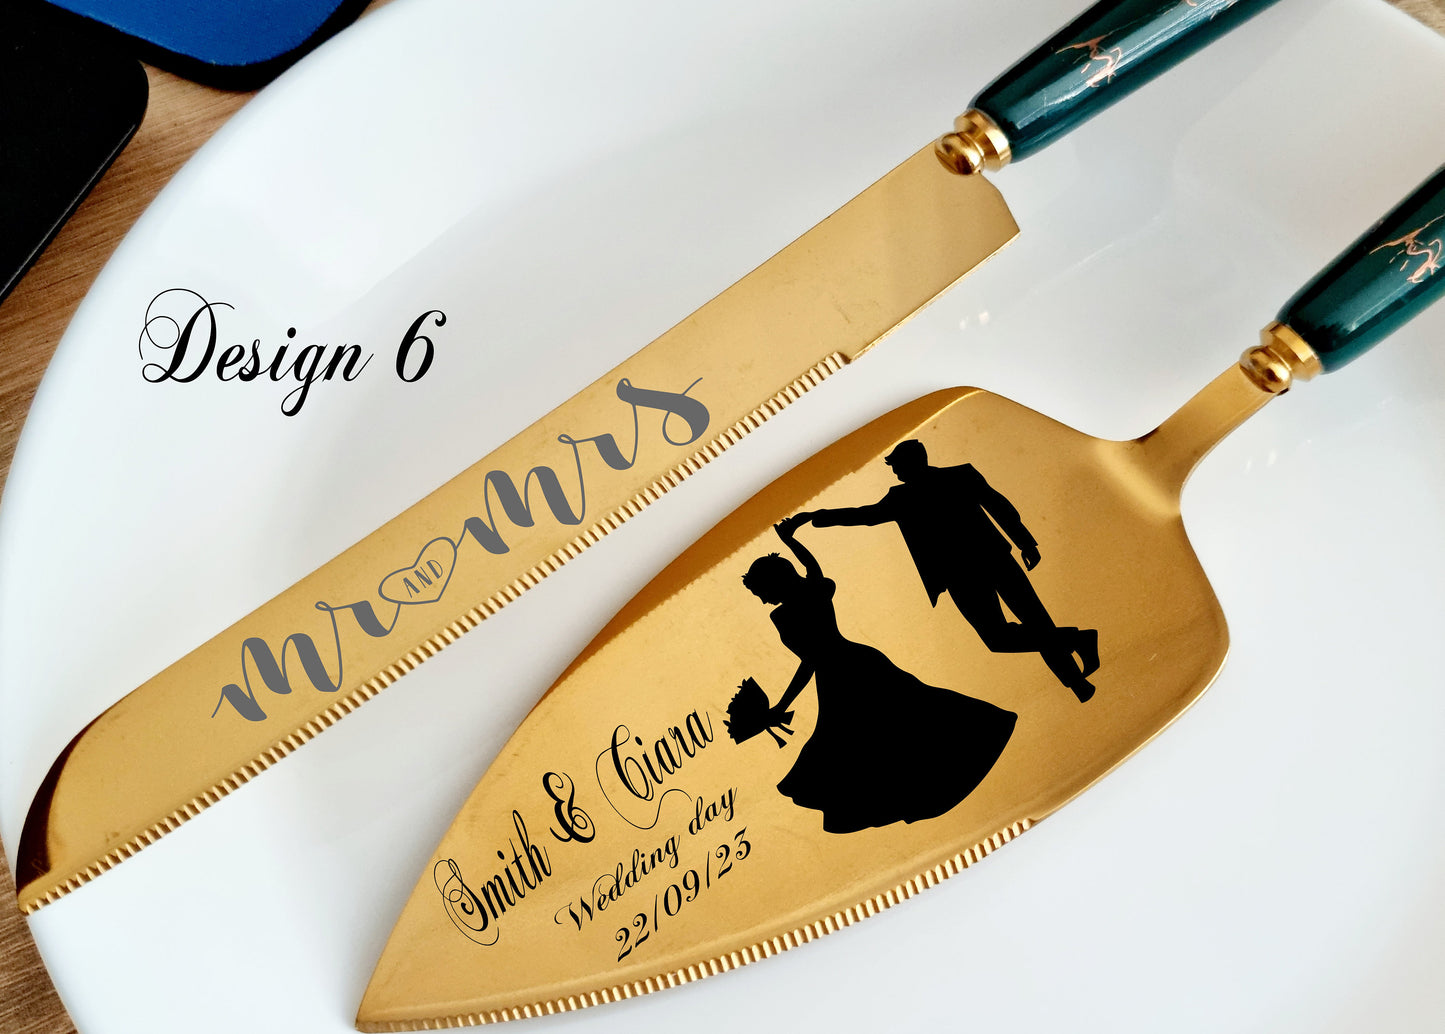 Personalised Engraved Cake Server, Slicer Set Wedding Birthday Anniversary Party, Gifts For All Occasions